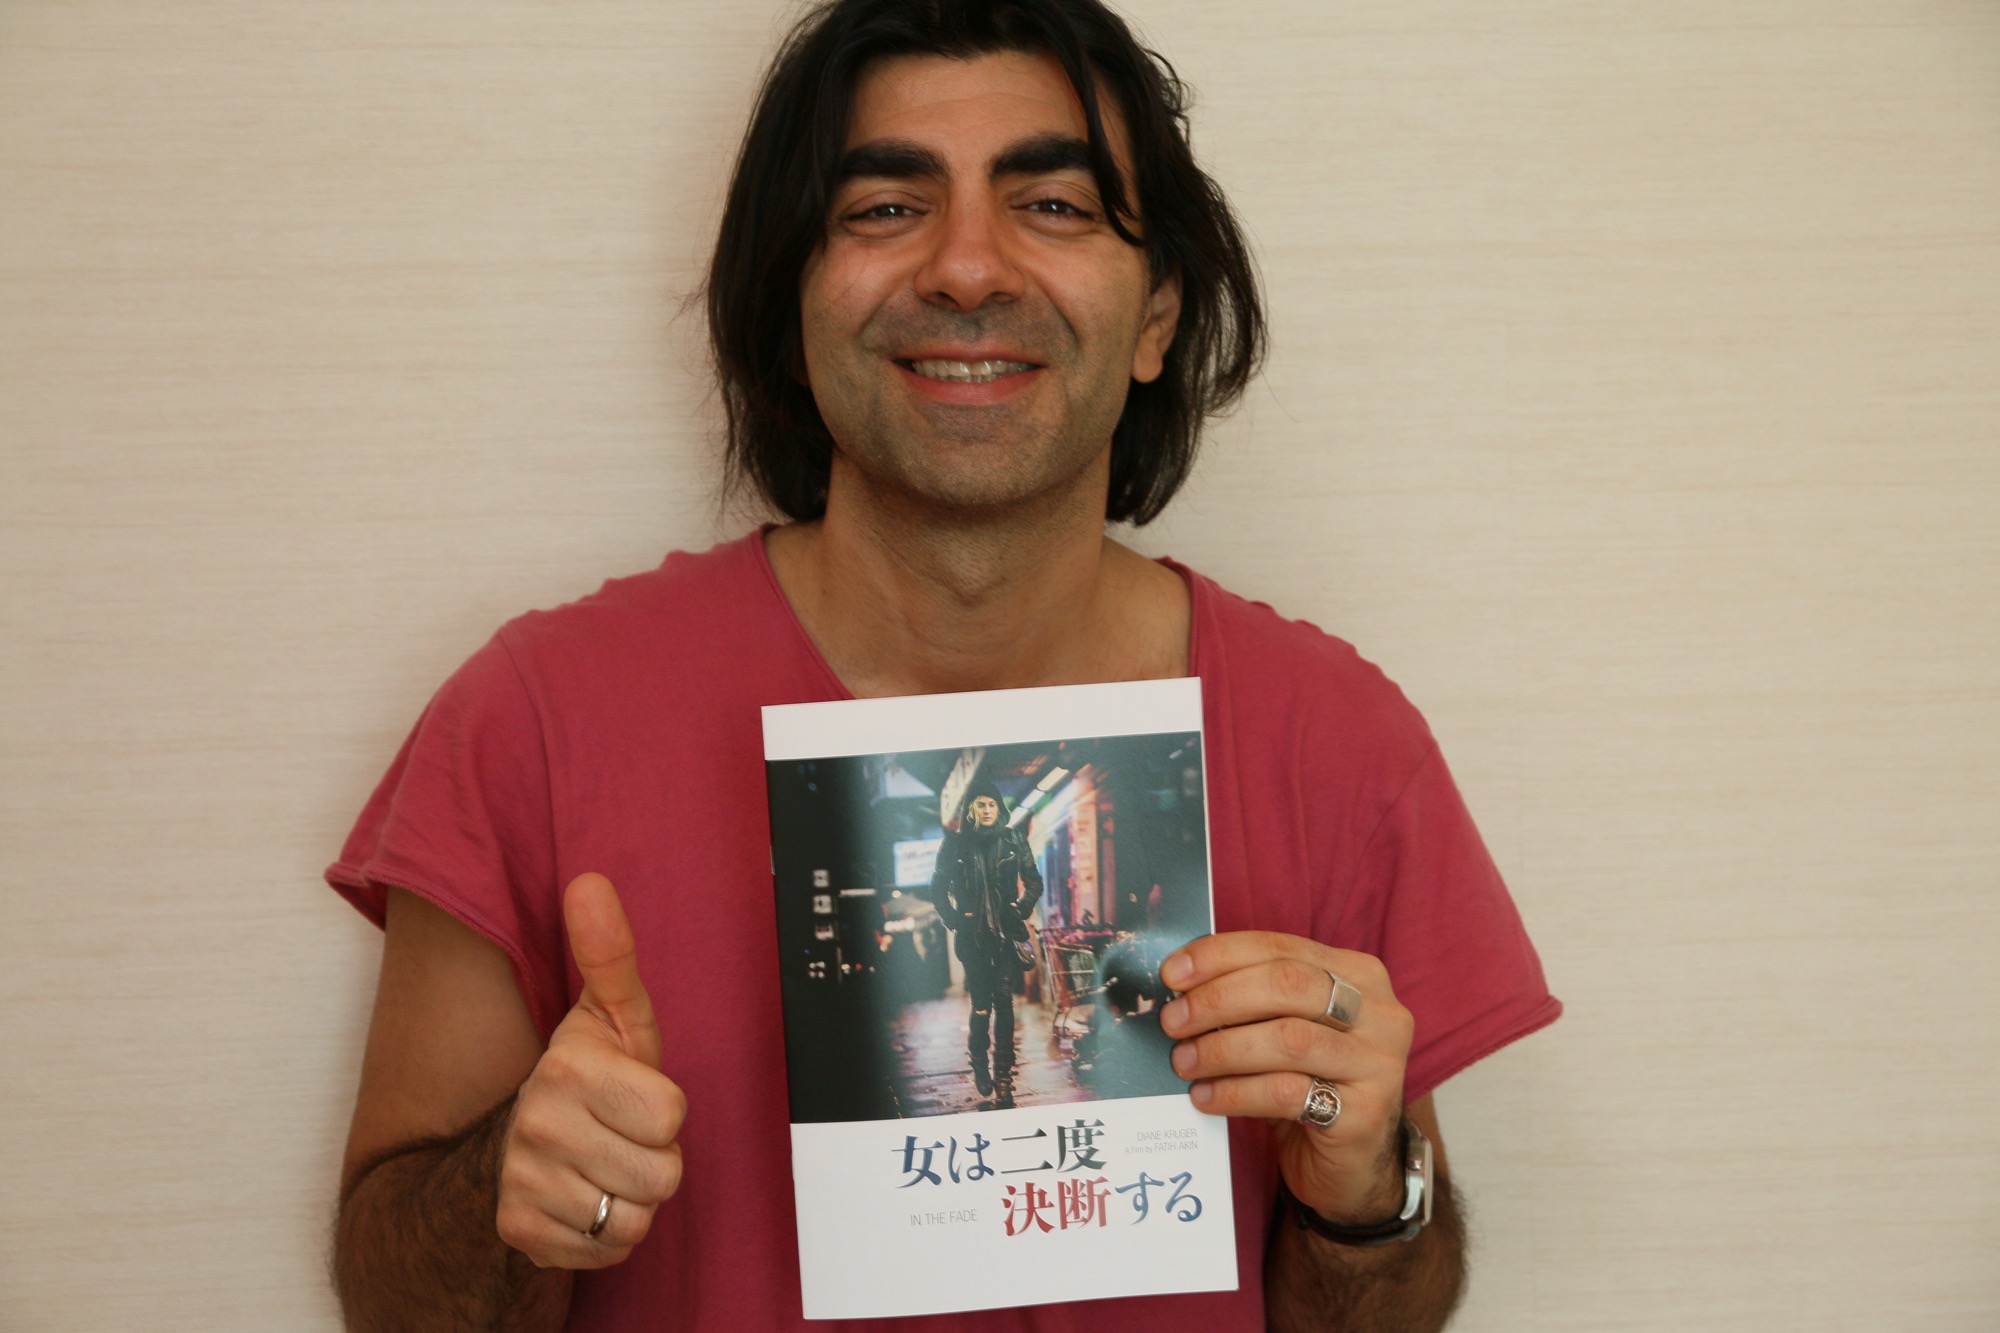 Interview with Fatih Akin about Music